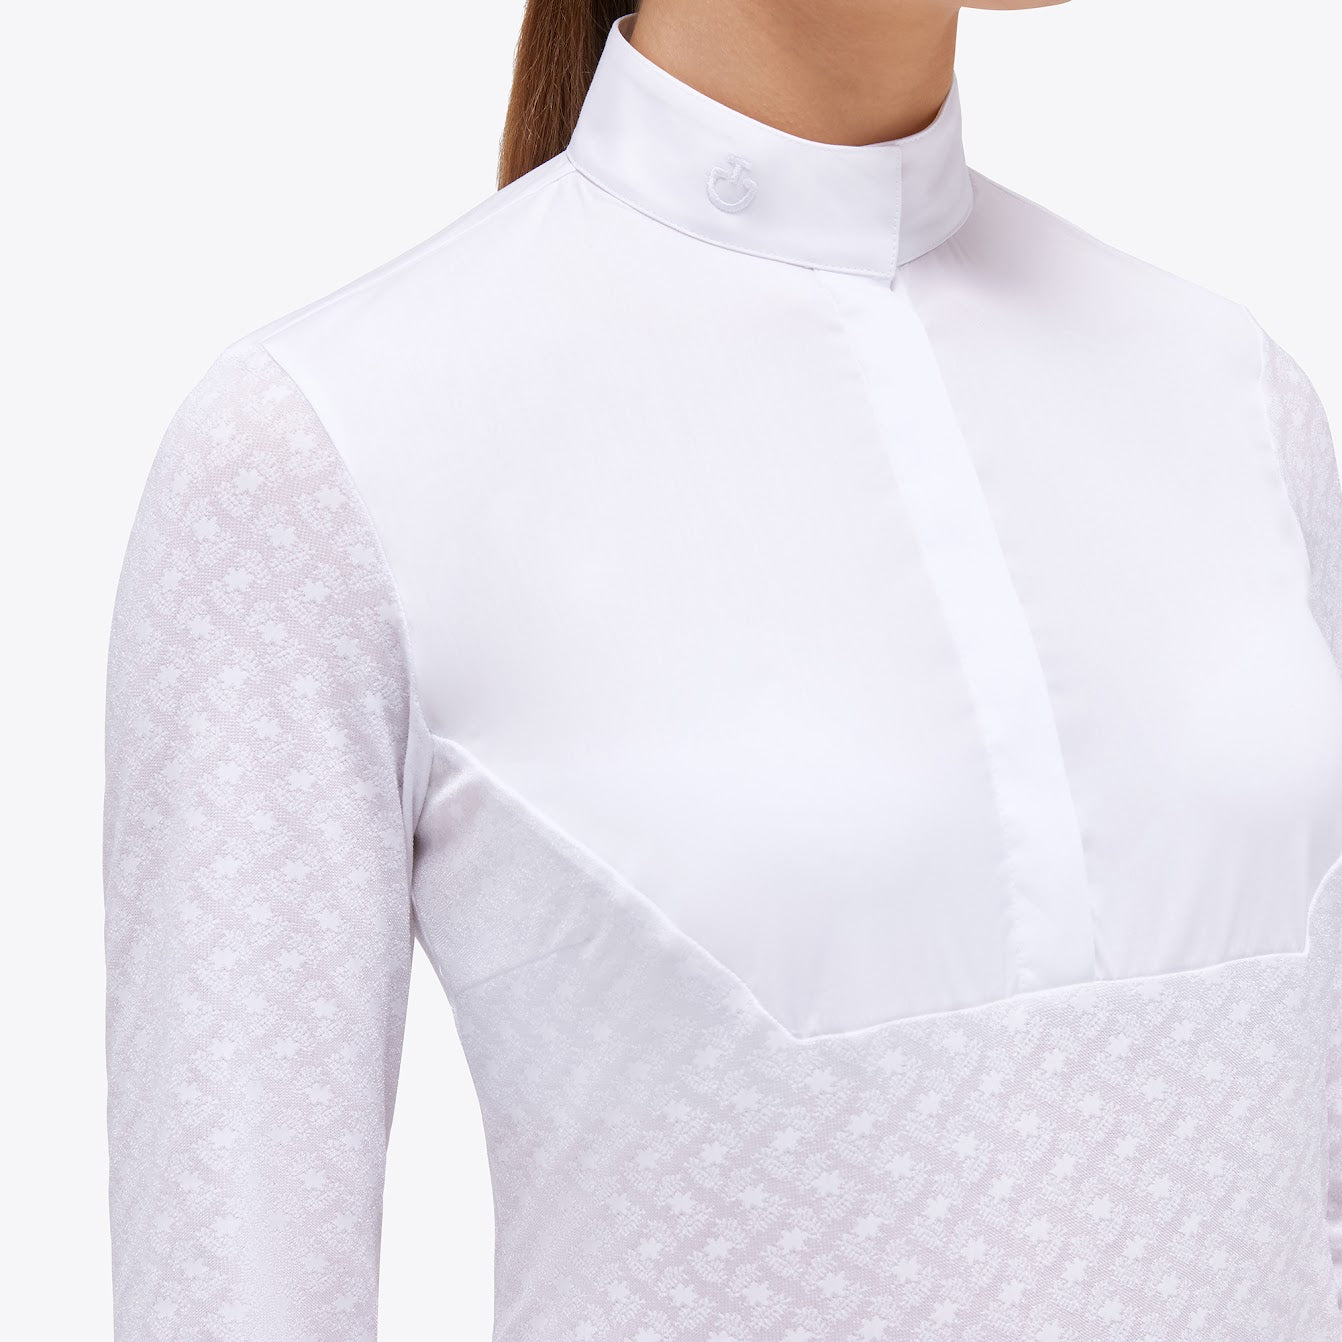 Cavalleria Toscana White Sheer Jacquard Jersey Competition Shirt